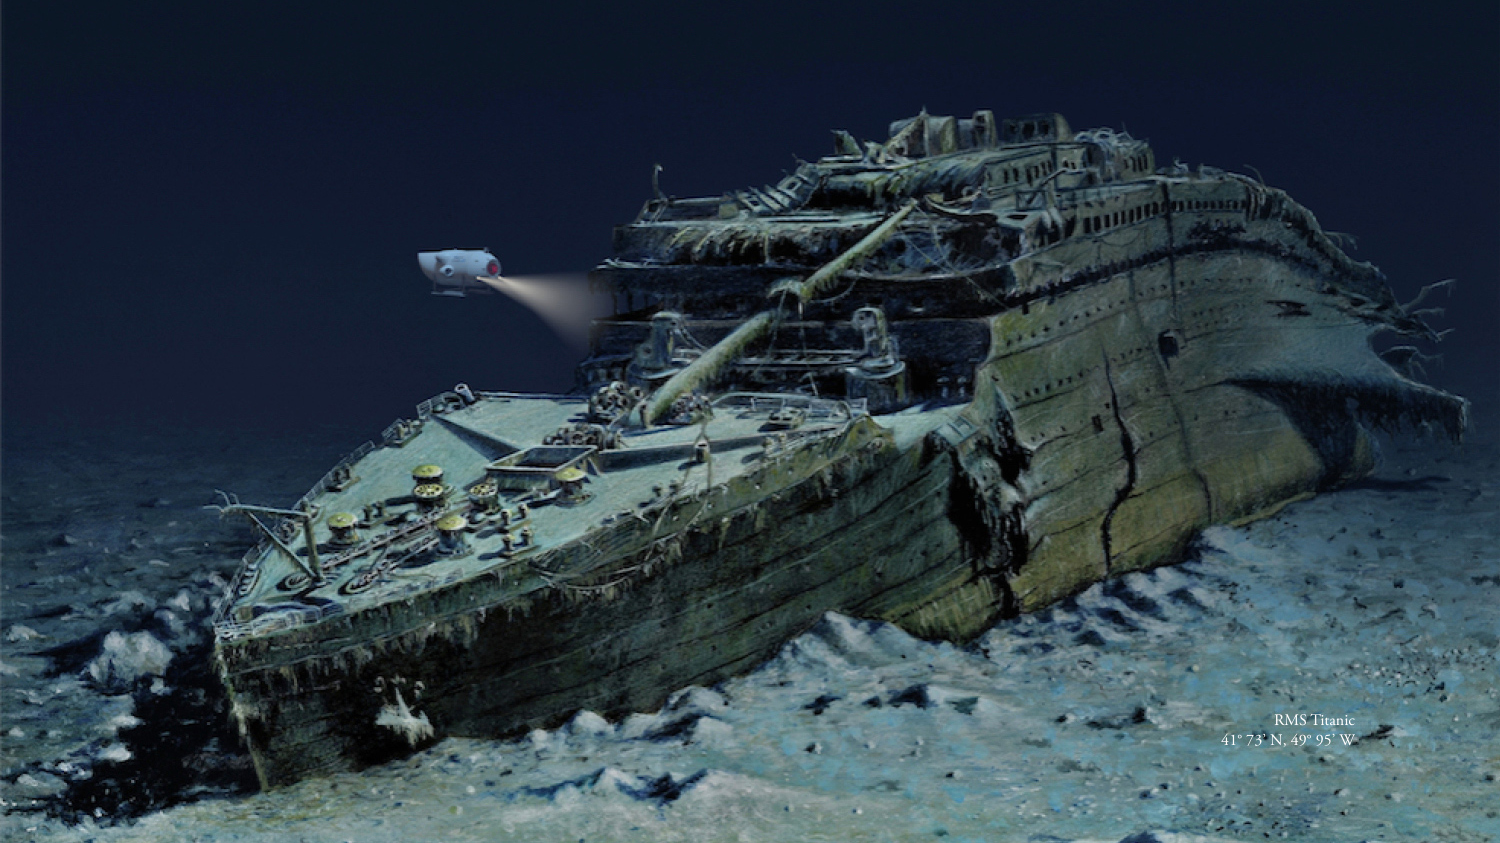 Shipwrecked or ‘ship-saved’